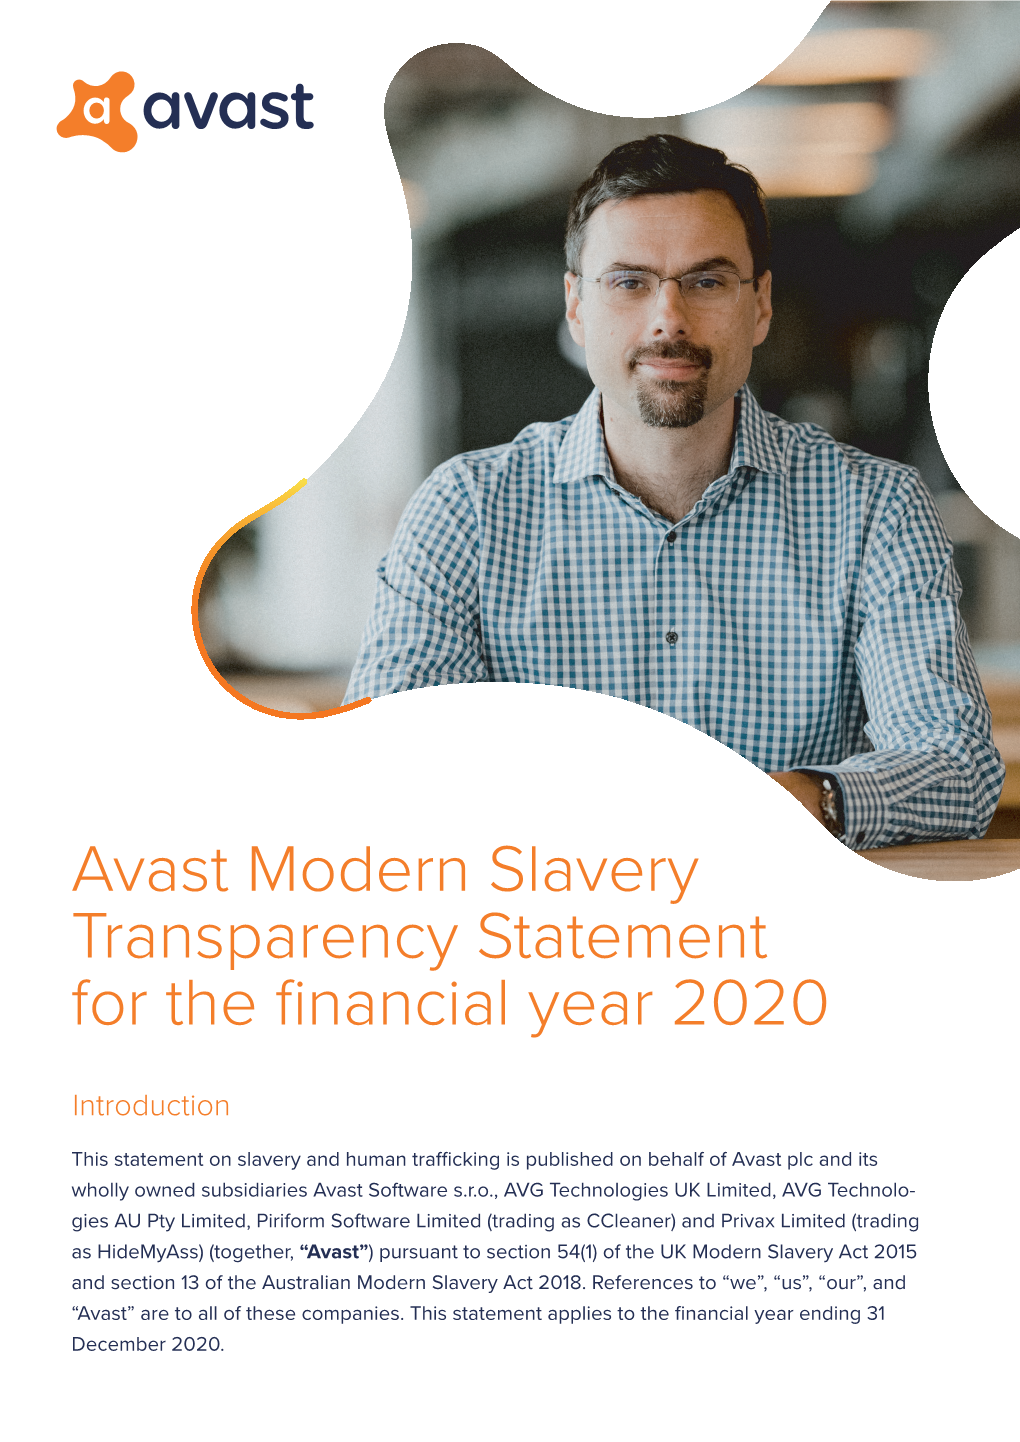 Avast Modern Slavery Transparency Statement for the Financial Year 2020